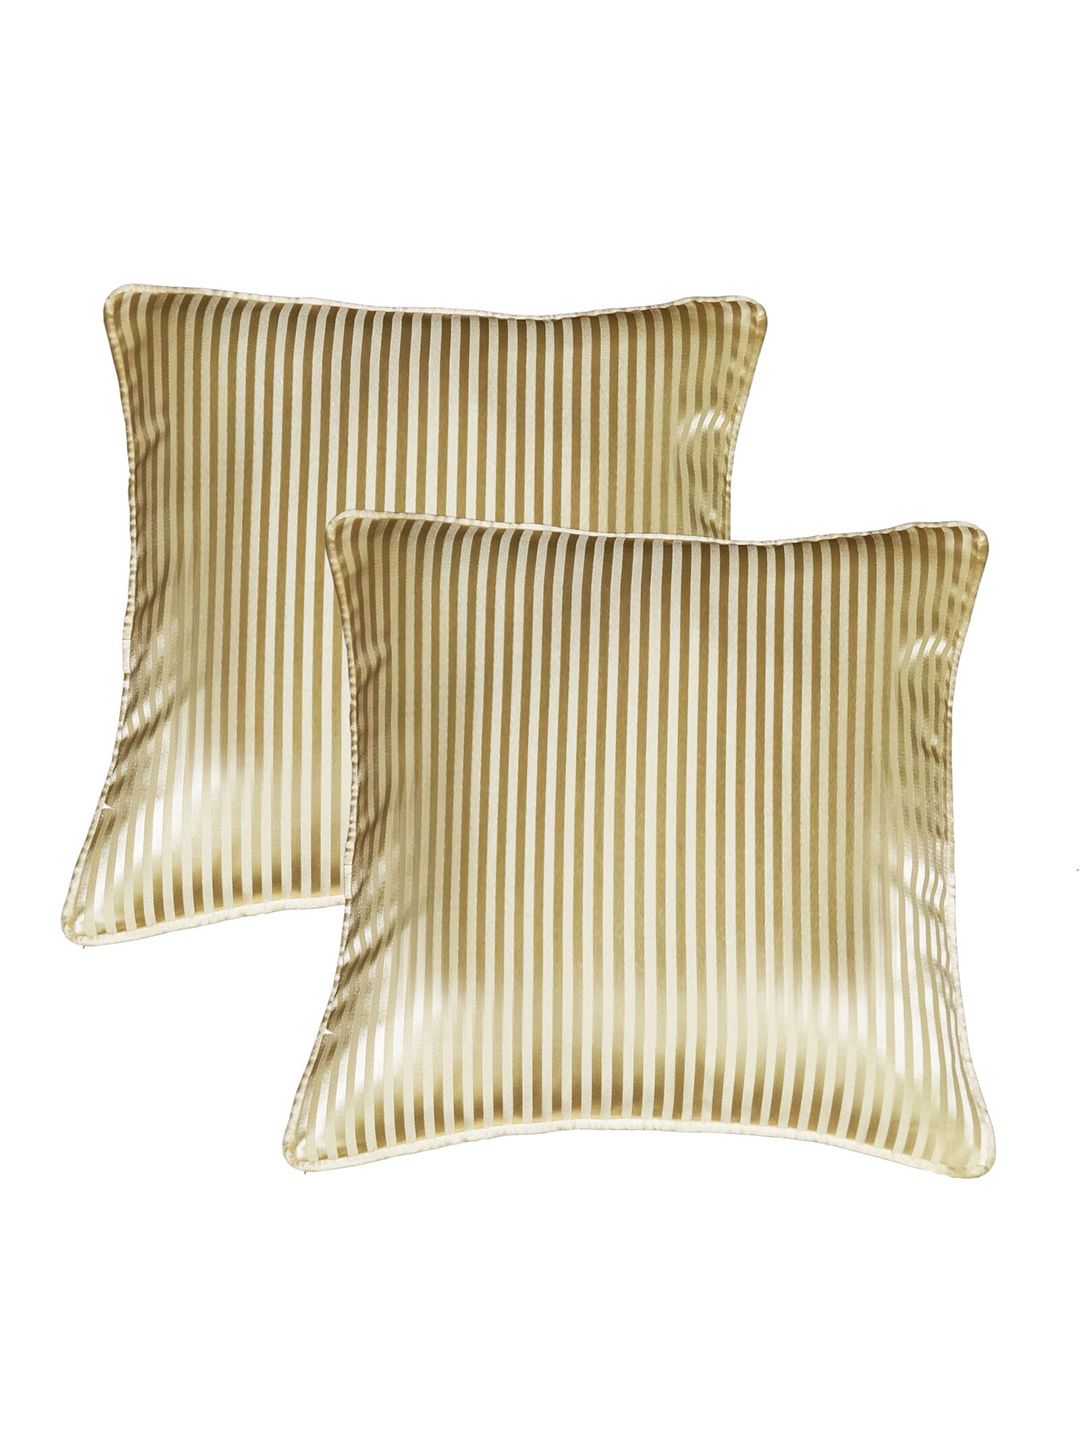 Lushomes Champagne Set of 2 Striped Square Cushion Covers Price in India